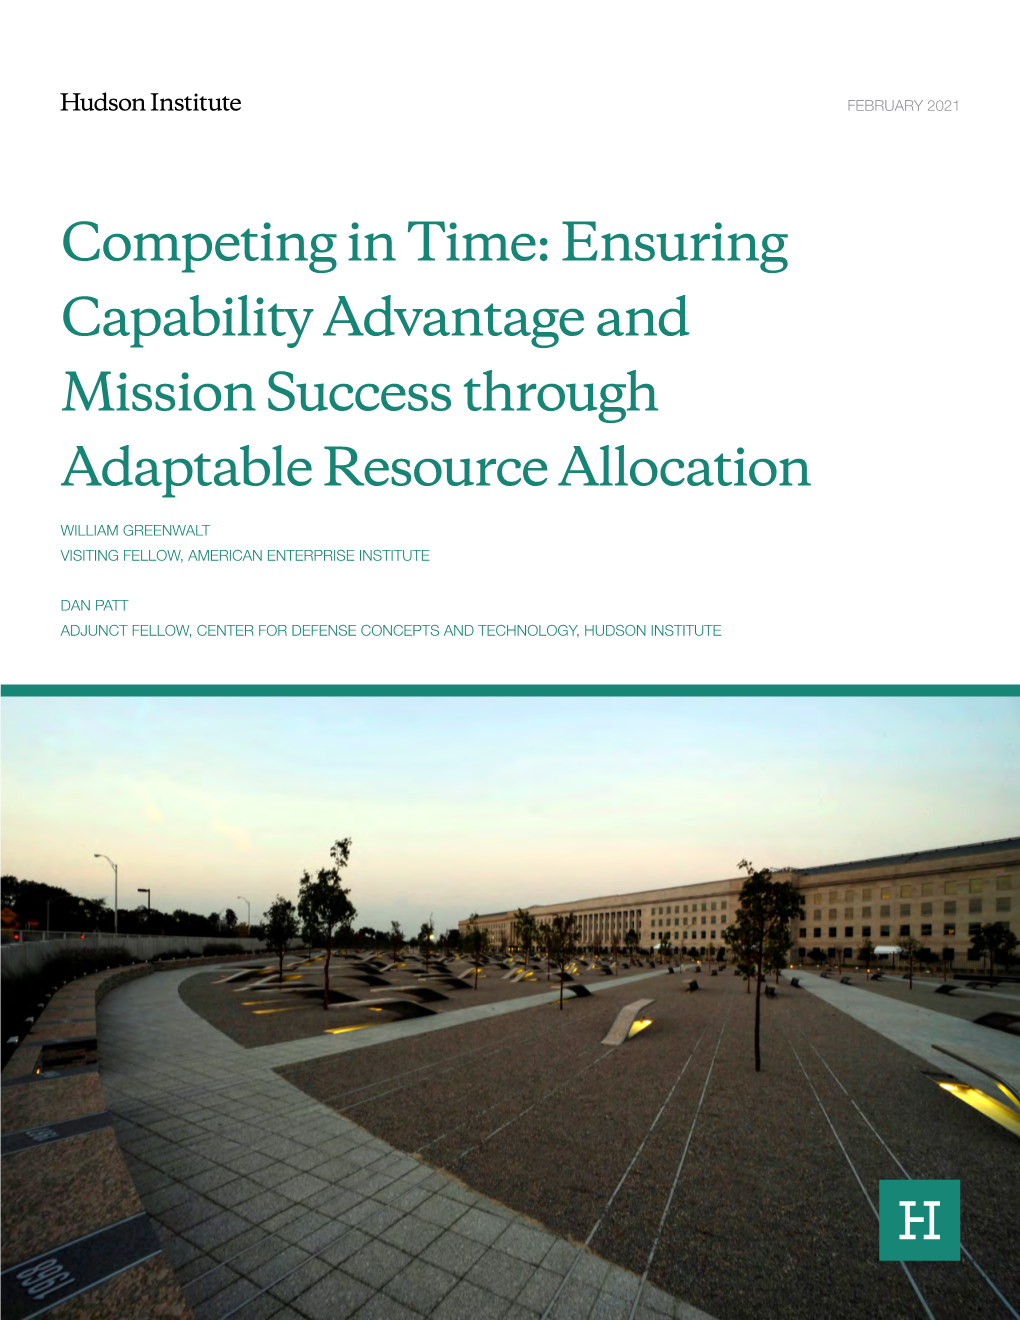 Competing in Time: Ensuring Capability Advantage and Mission Success Through Adaptable Resource Allocation